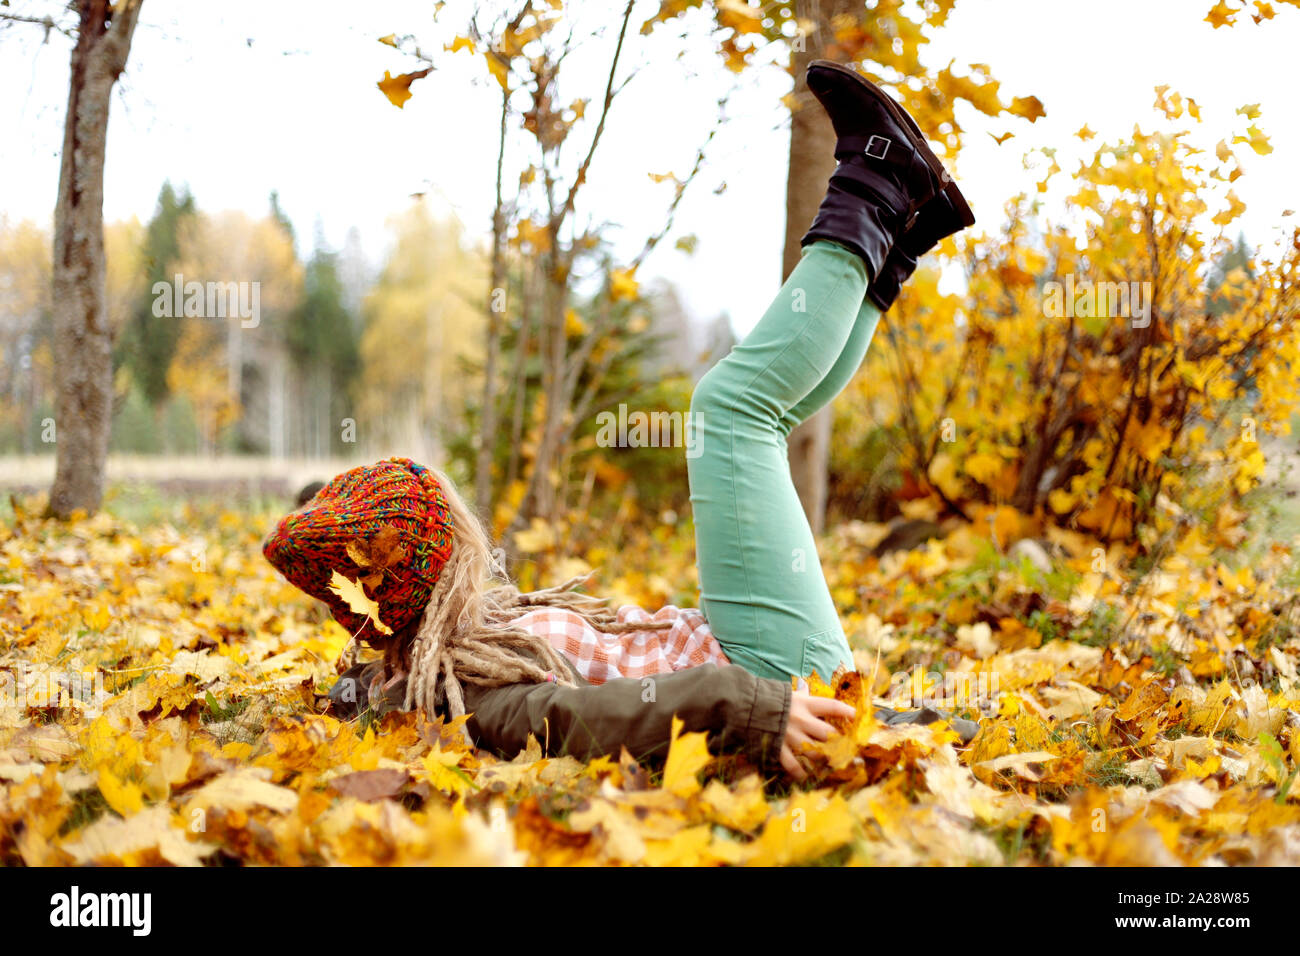 Girl fell over in the golden yellow maple leaves and is having fun in the maple leaves in autumn. Stock Photo